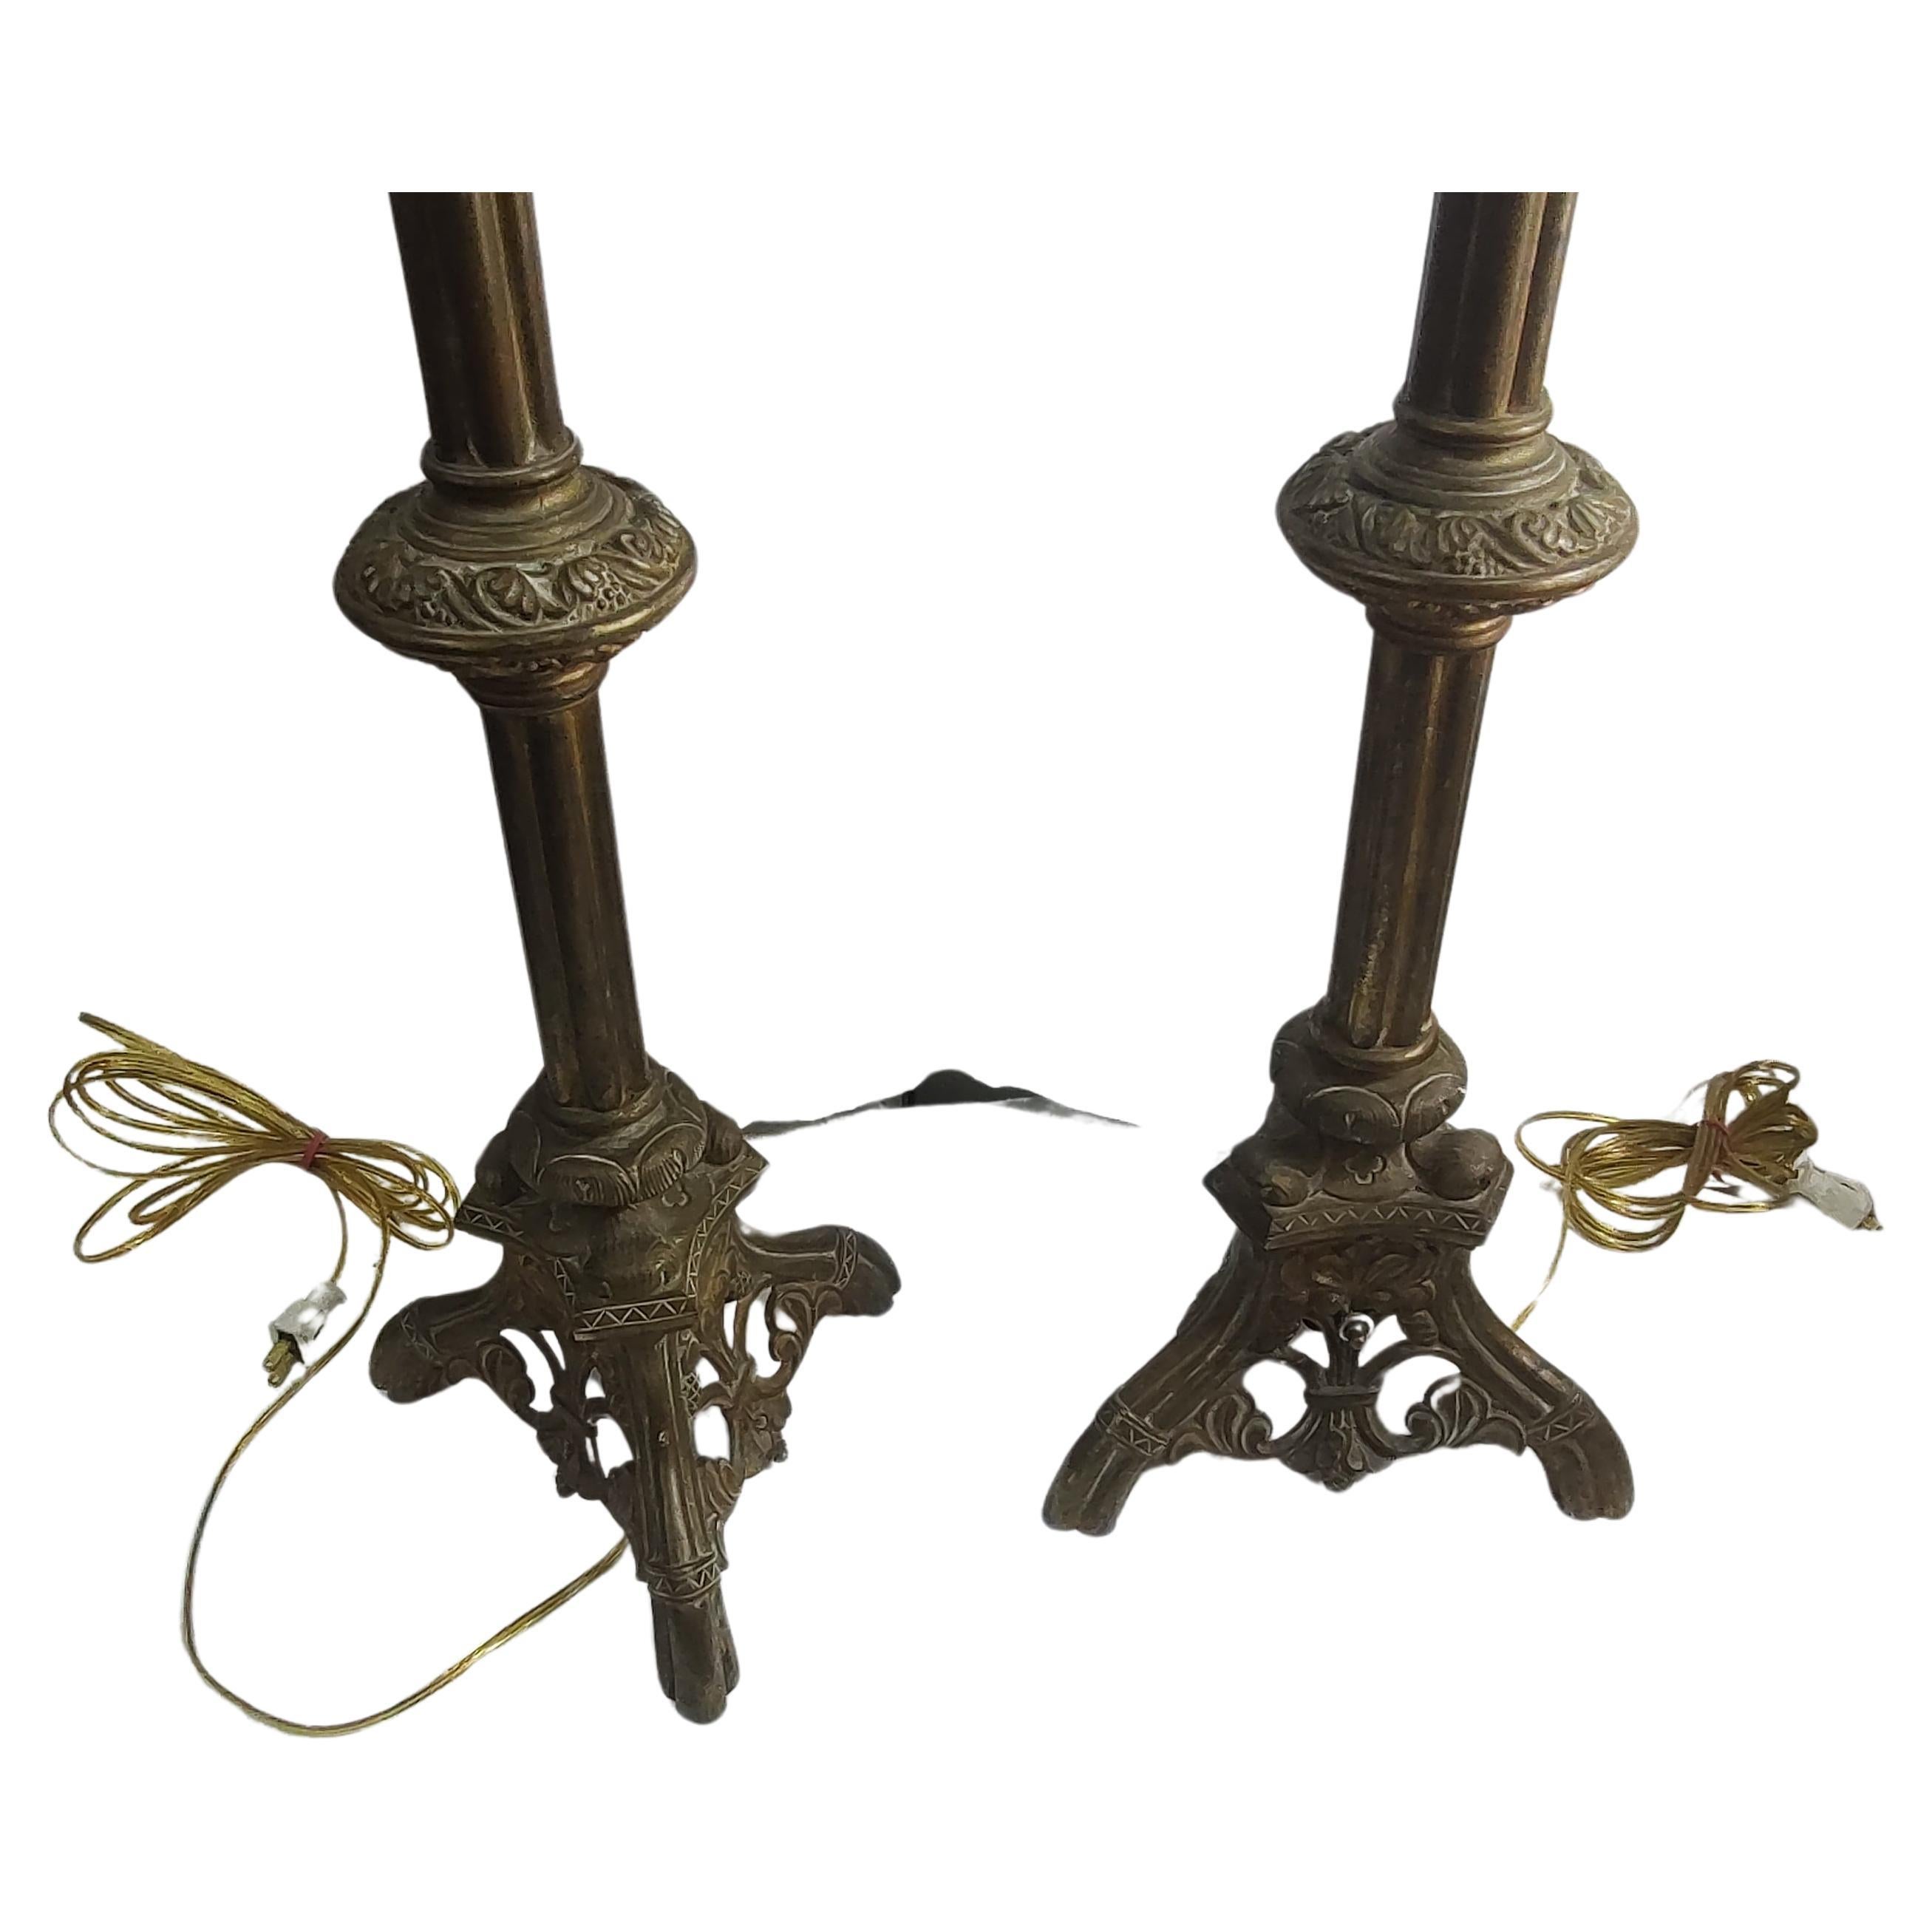 Beautiful pair of tall solid brass Ecclesiastical Edwardian style candlesticks converted to table lamps over 50 years ago and just recently revived with new wiring and double sockets. Great brass castings, heavy weight for stability. Sold as a set.